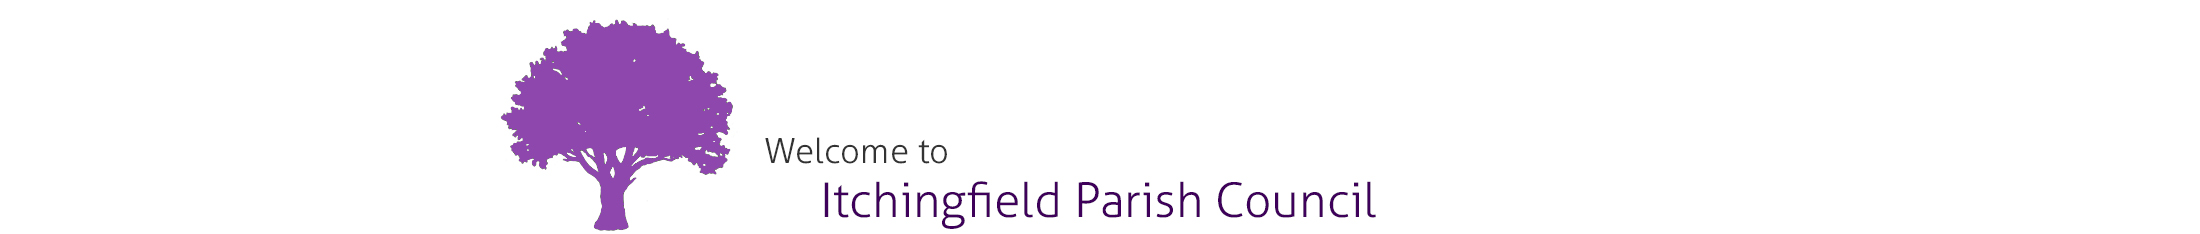 Header Image for Itchingfield Parish Council